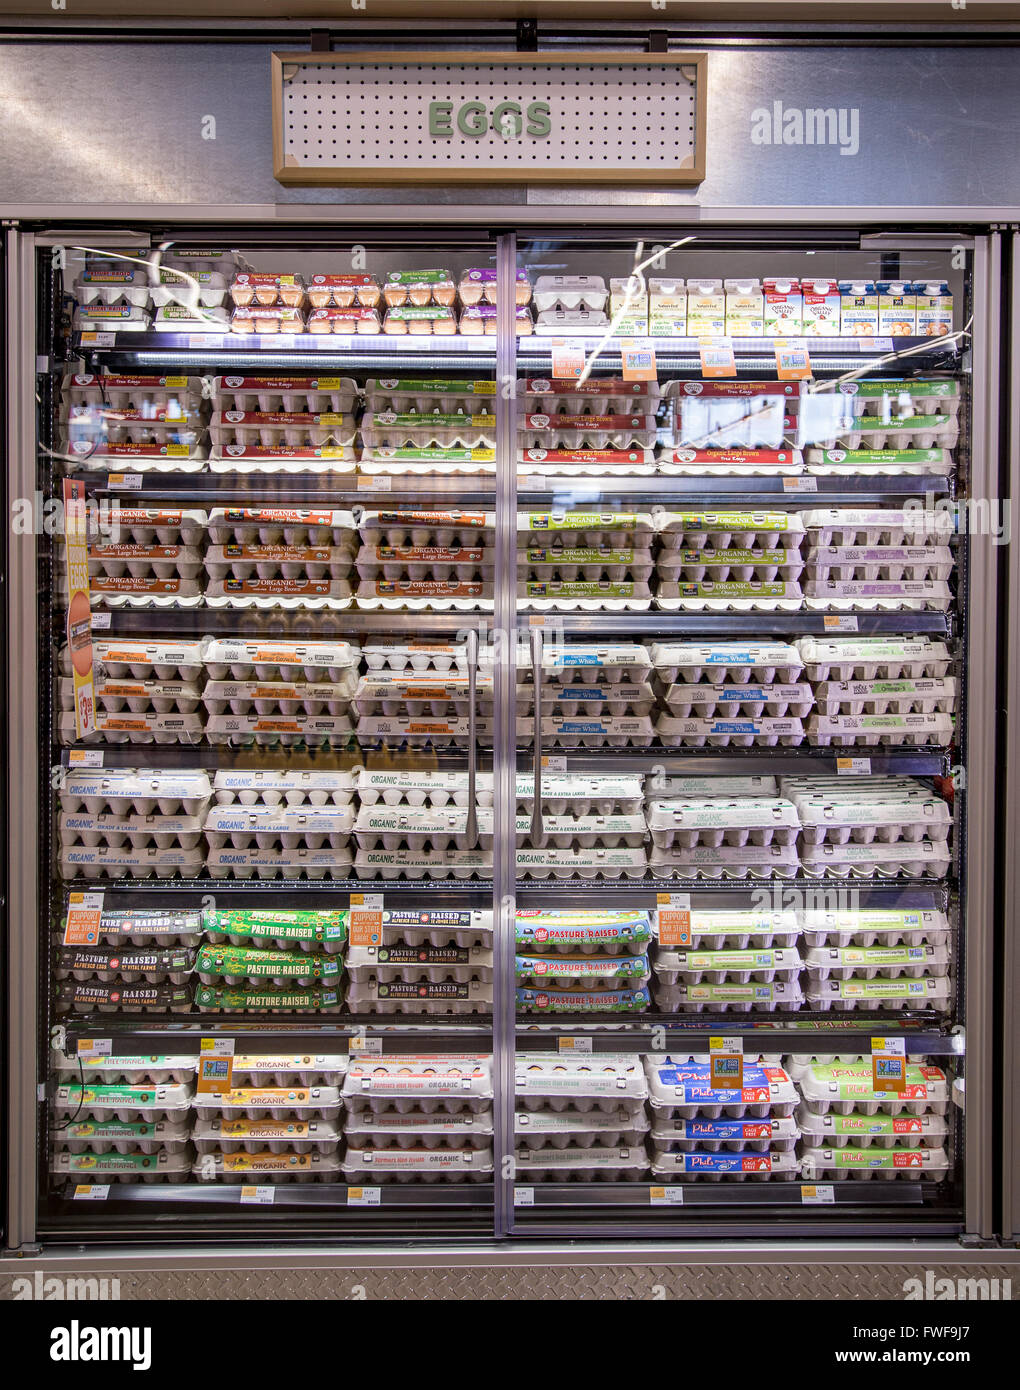 cartons of eggs displayed in a dairy refrigerator case at a grocery store Stock Photo